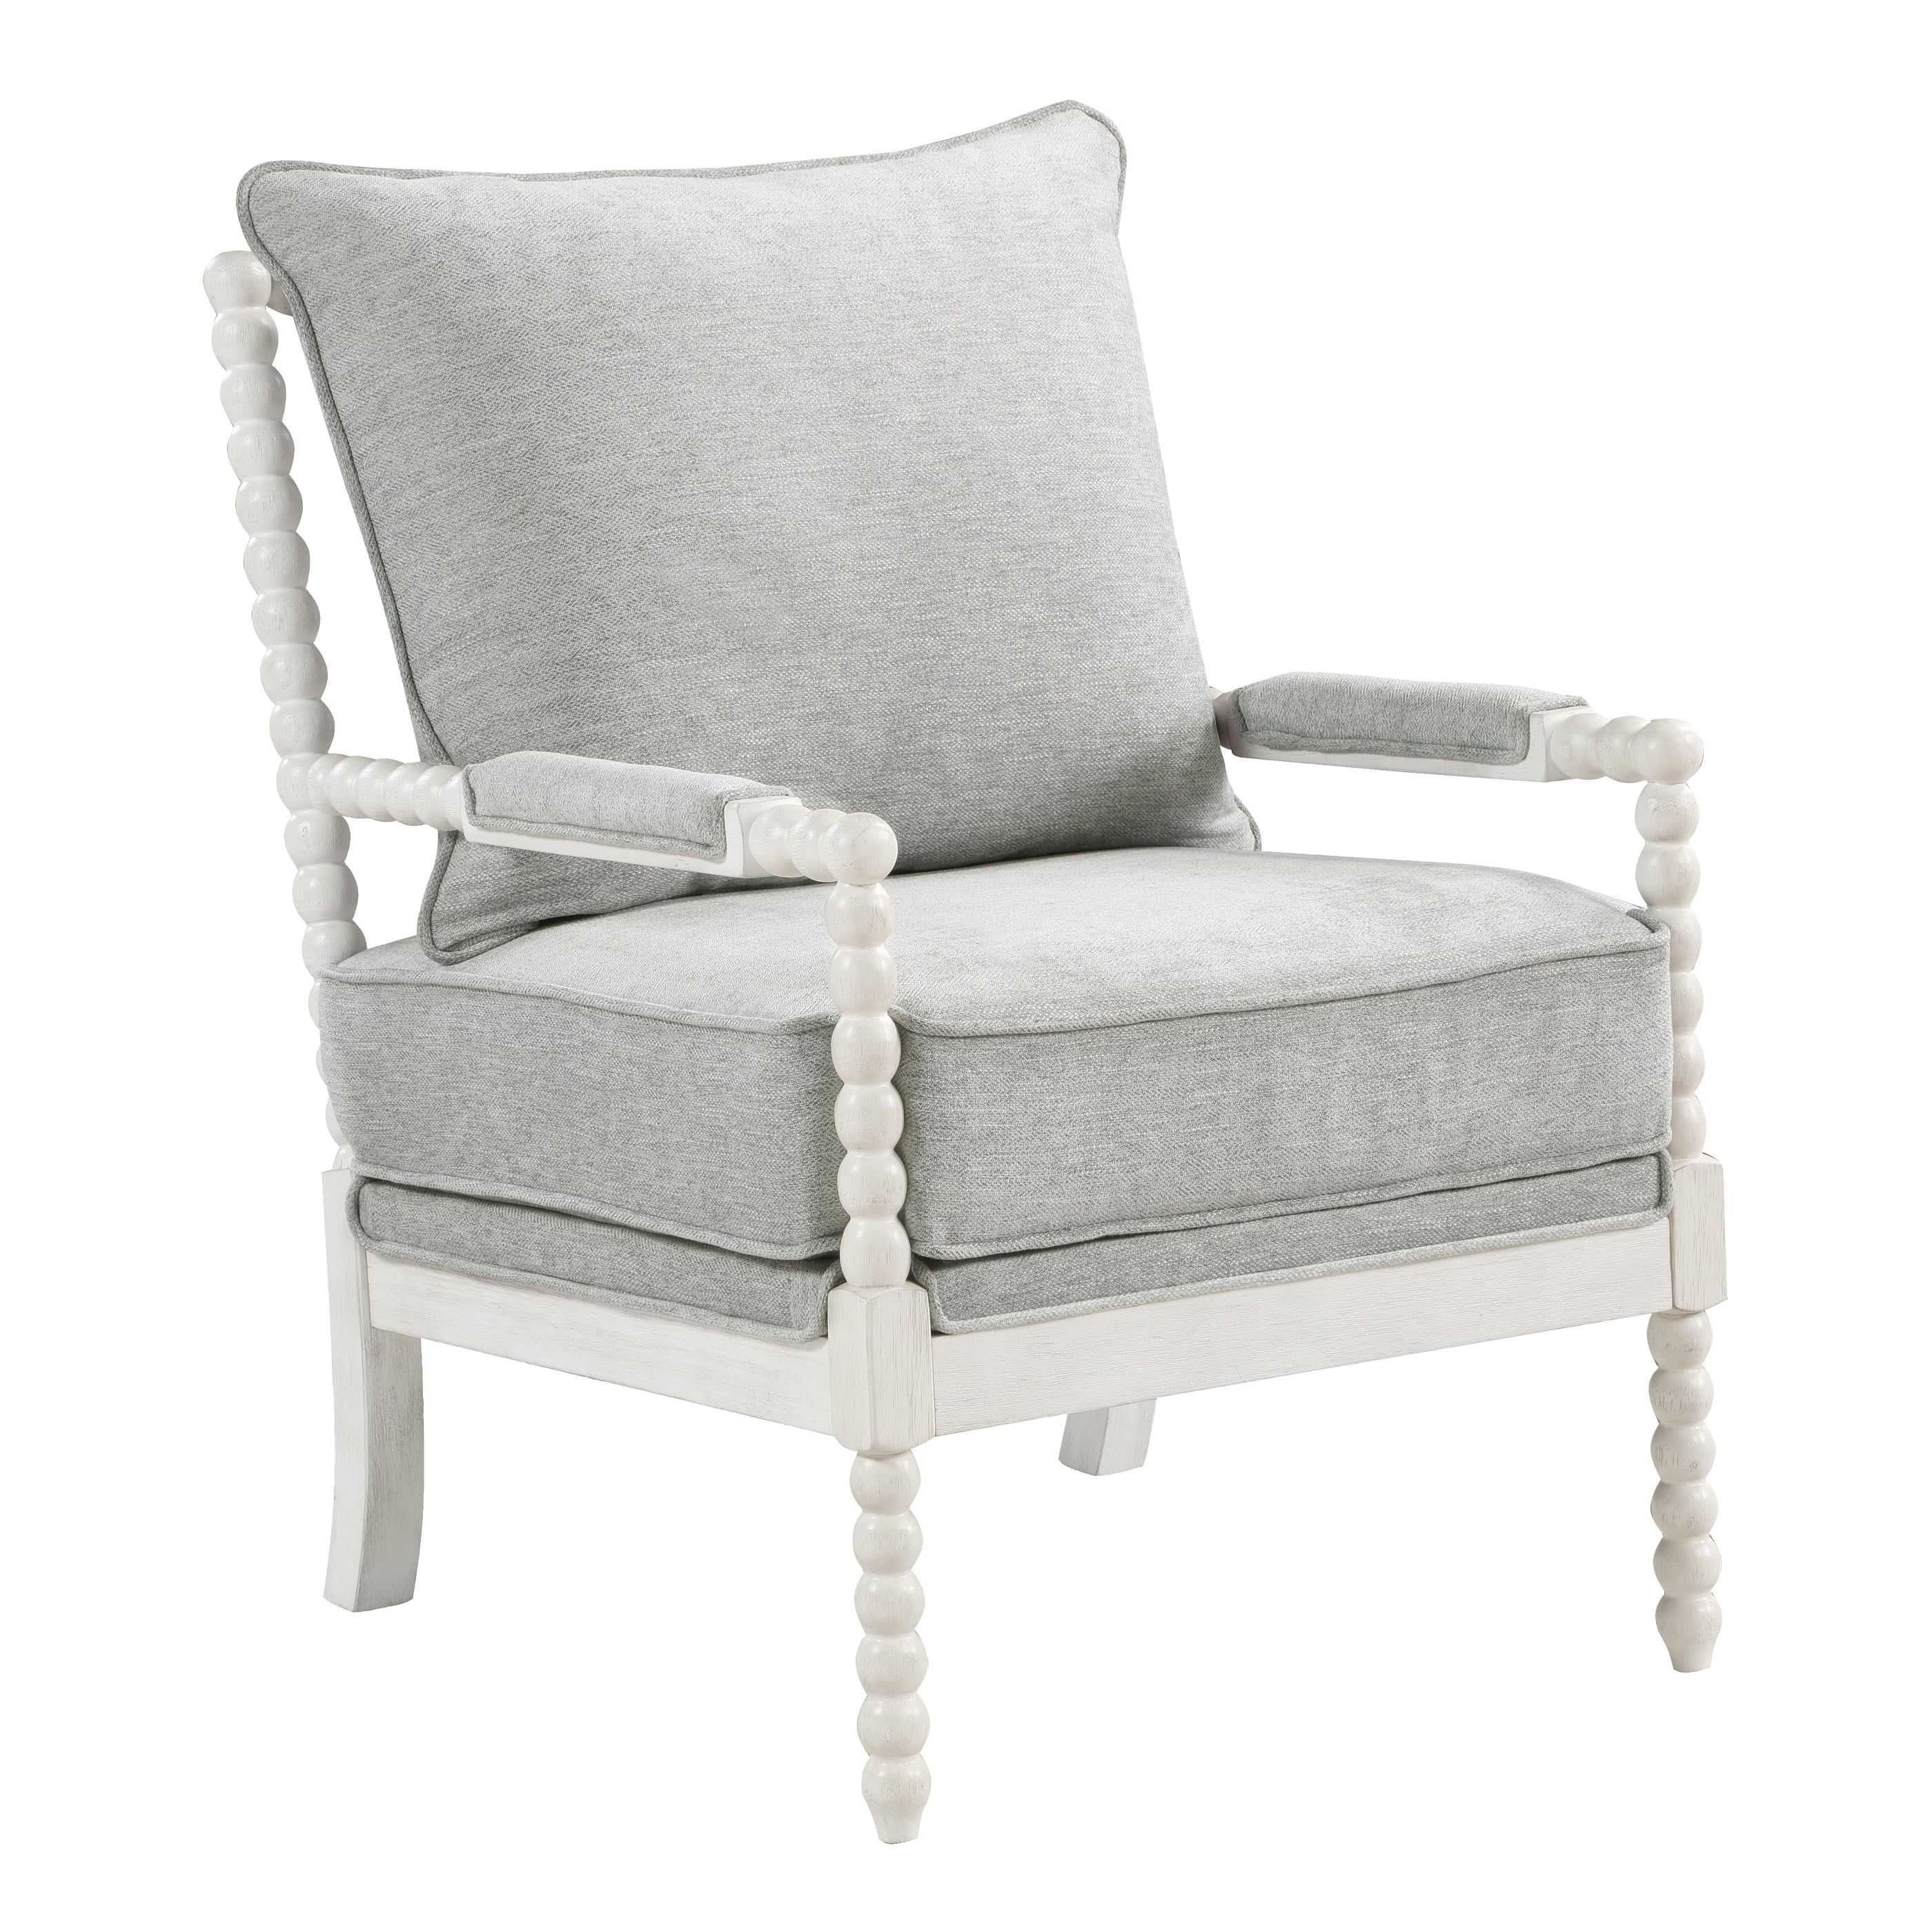 OSP Home Furnishings Kaylee Spindle Chair in Smoke Fabric with White Frame | Walmart (US)